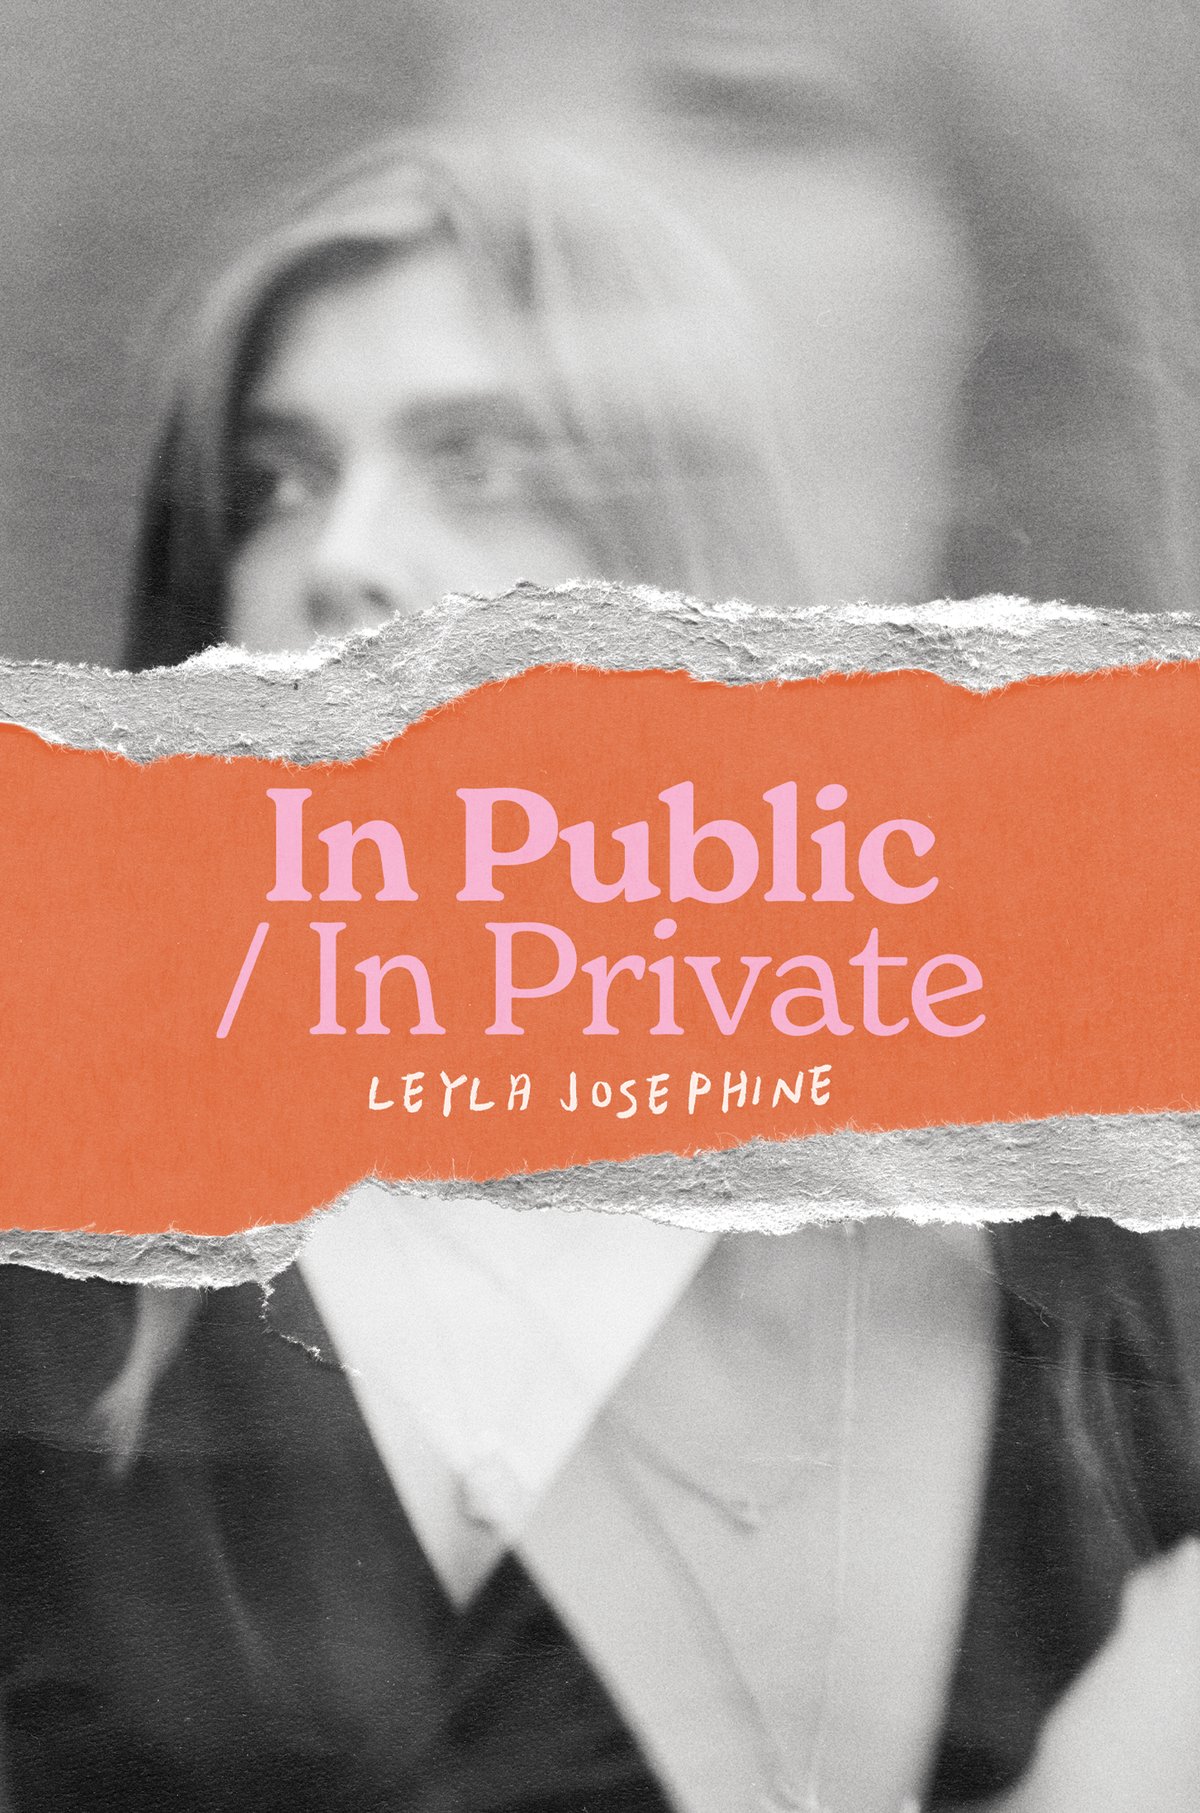 Image of In Public/In Private by Leyla Josephine